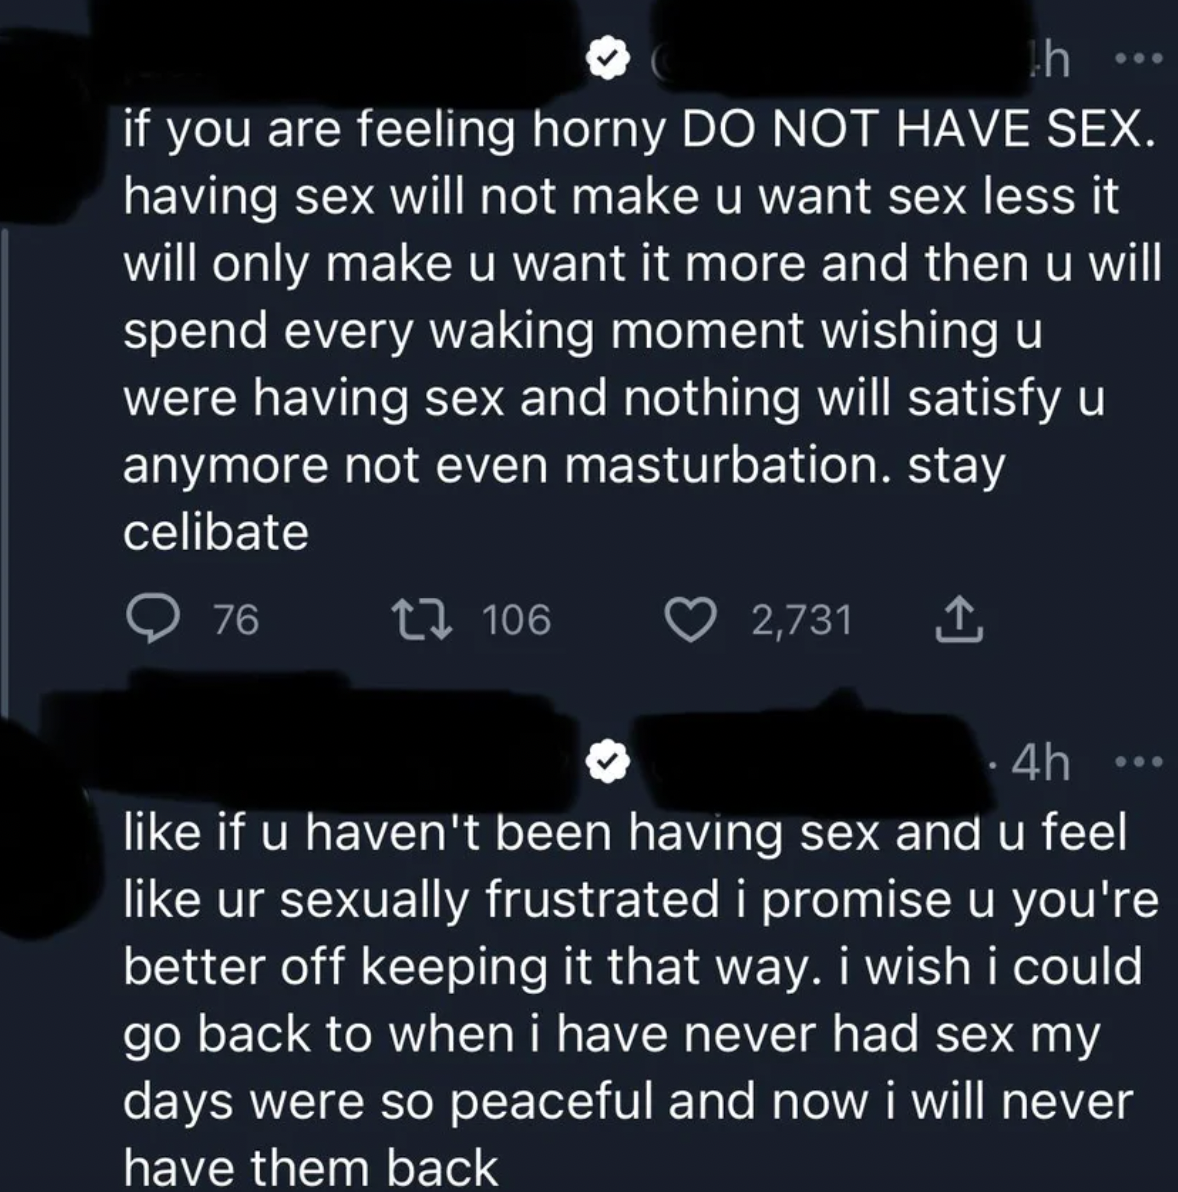 I have sex - if you are feeling horny Do Not Have Sex. having sex will not make u want sex less it will only make u want it more and then u will spend every waking moment wishing u were having sex and nothing will satisfy u anymore not even masturba